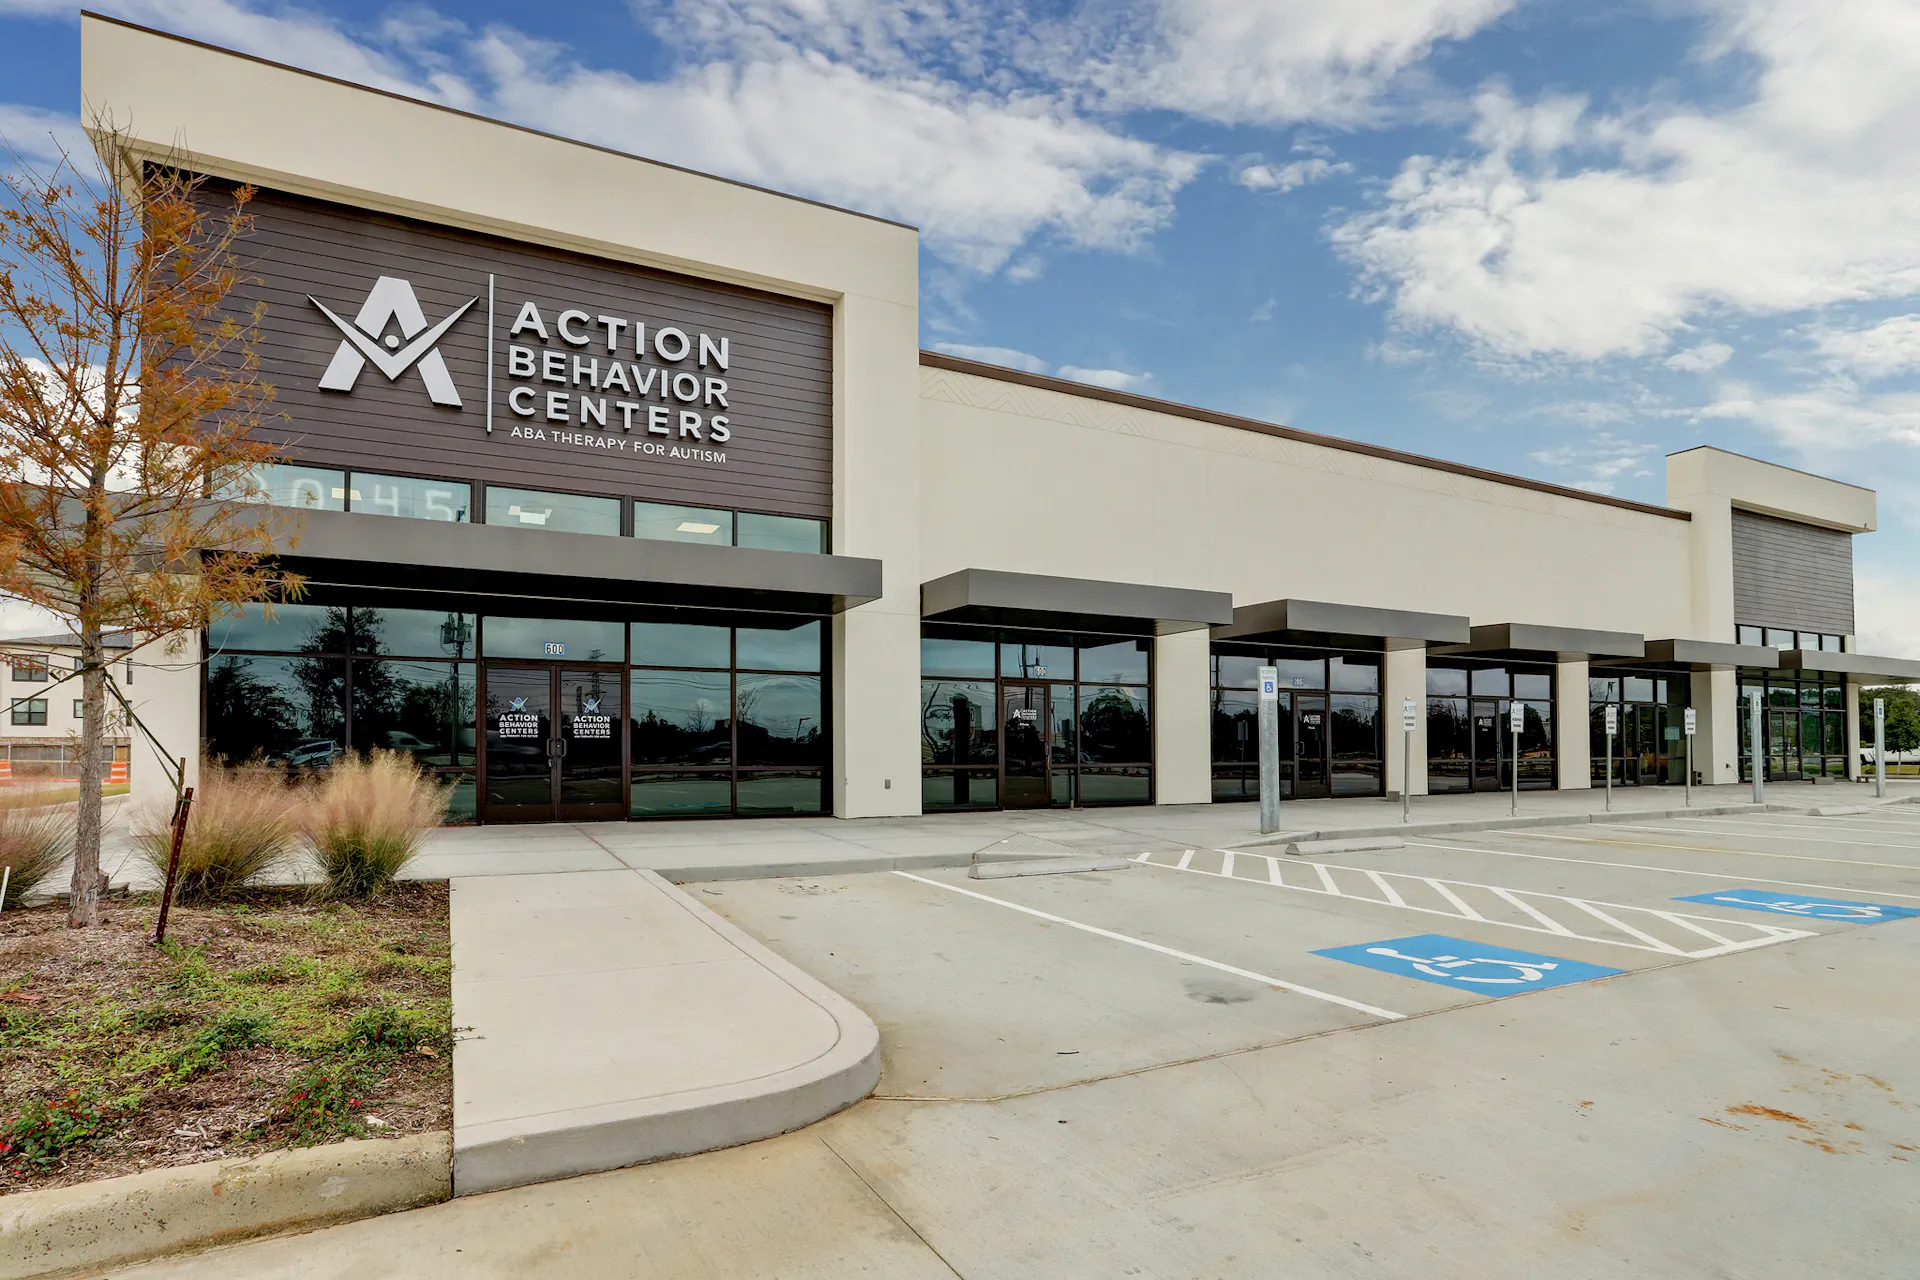 A 11,000 square foot commercial development pre-leased to Action Behavior Center in Austin, Texas